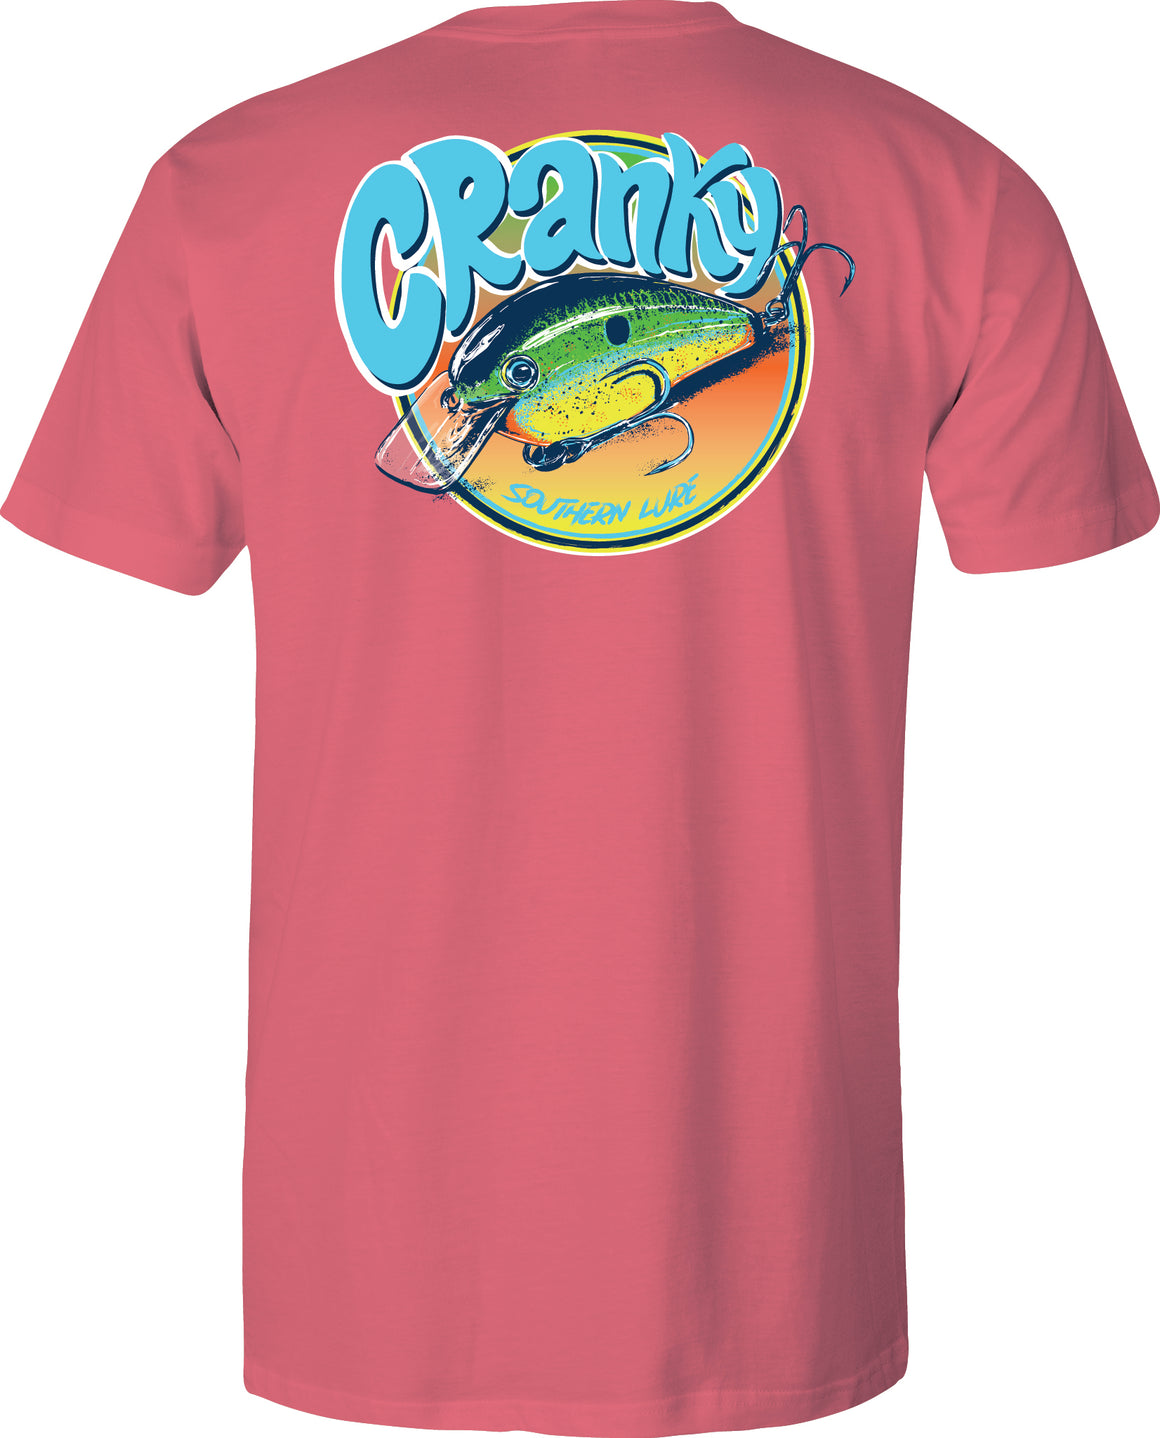 Youth & Toddler Short Sleeve Tee Cranky V4 - Coral